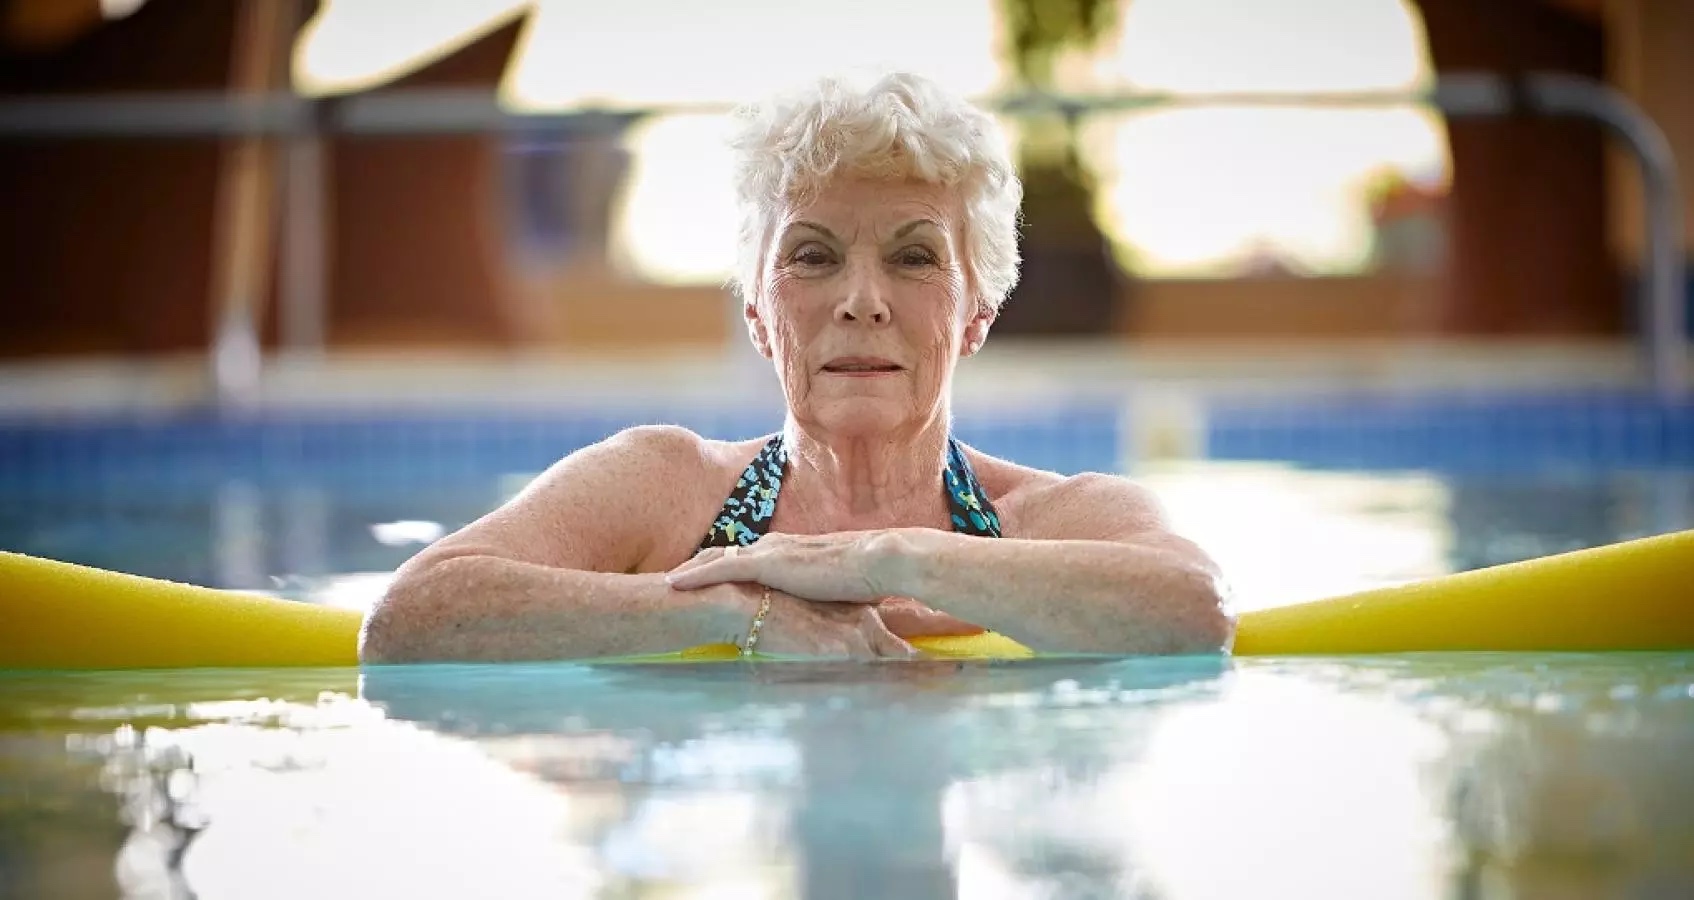 Aquatic Therapy For Parkinson’s Disease: Let’s Dive In